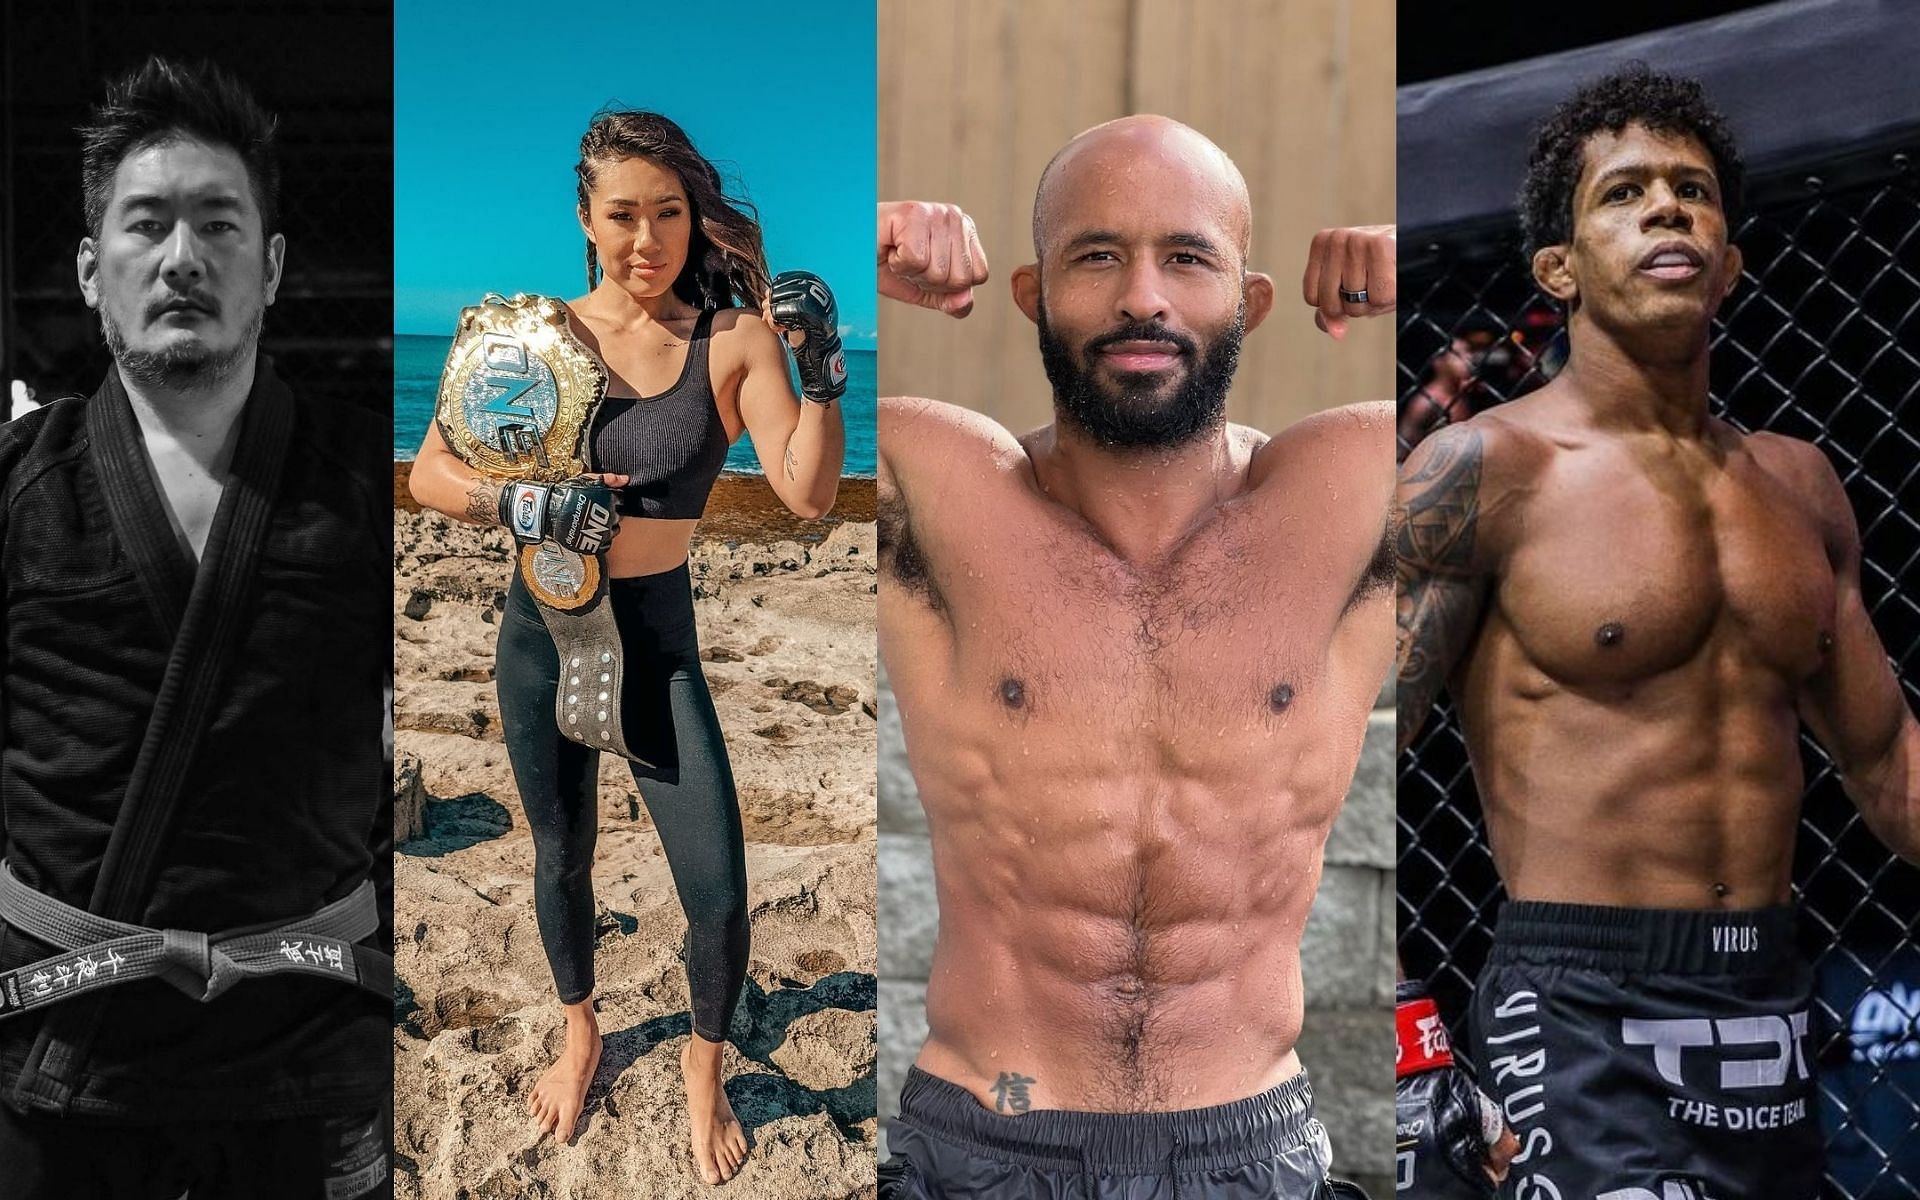 ONE Championship is setting up its historic 10th year event, ONE X. [Photos: @yodchatri, @angelaleemma, @mighty, @moraesadrianomma on Instagram]